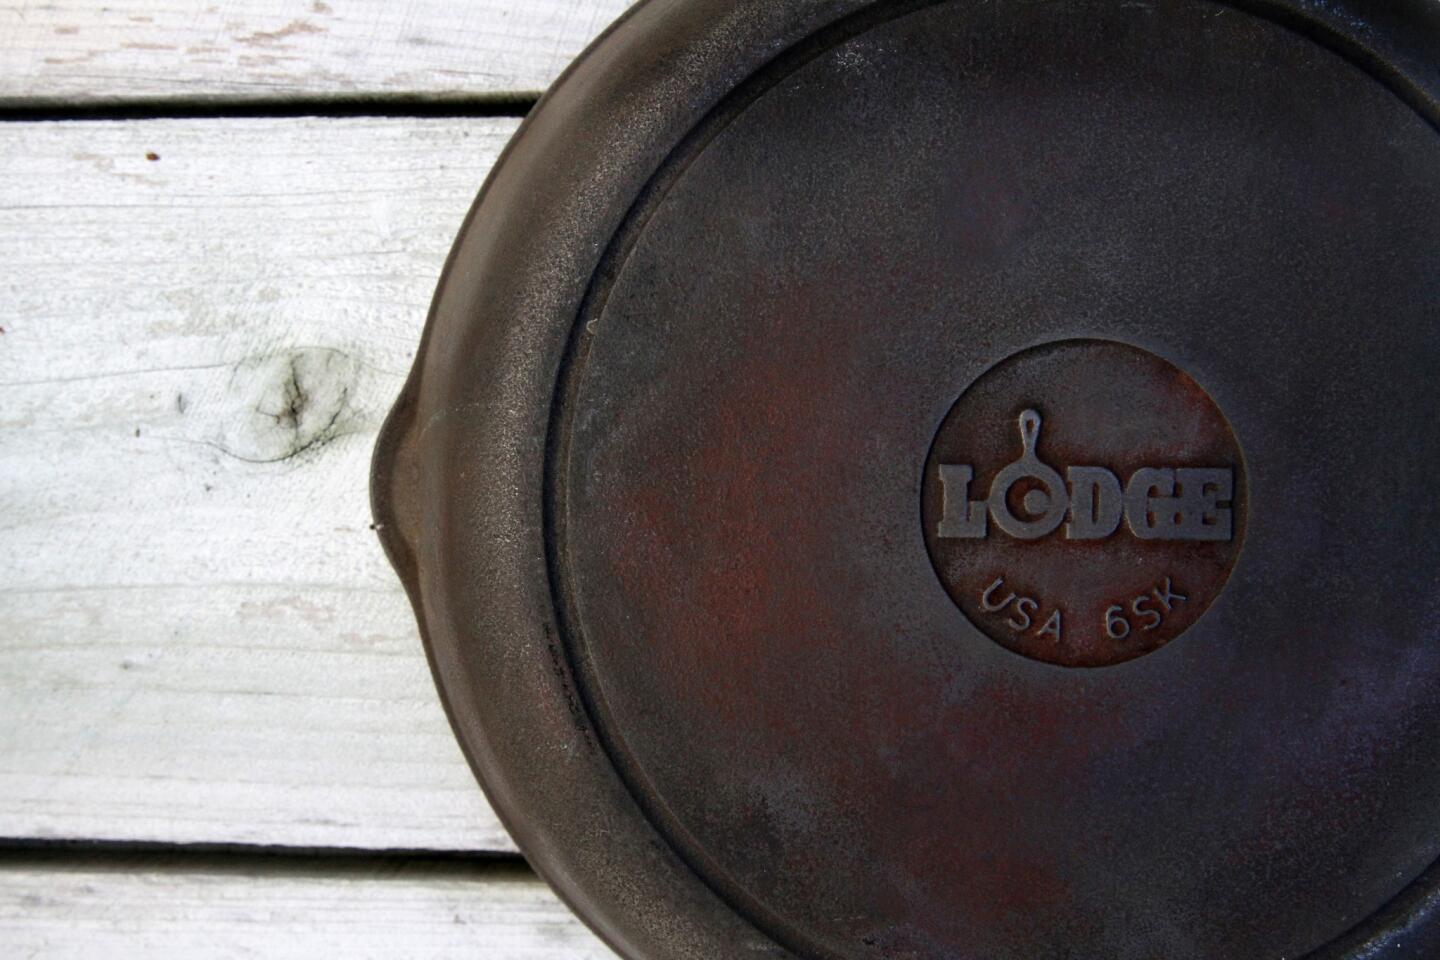 A just-stripped Lodge cast iron pan.